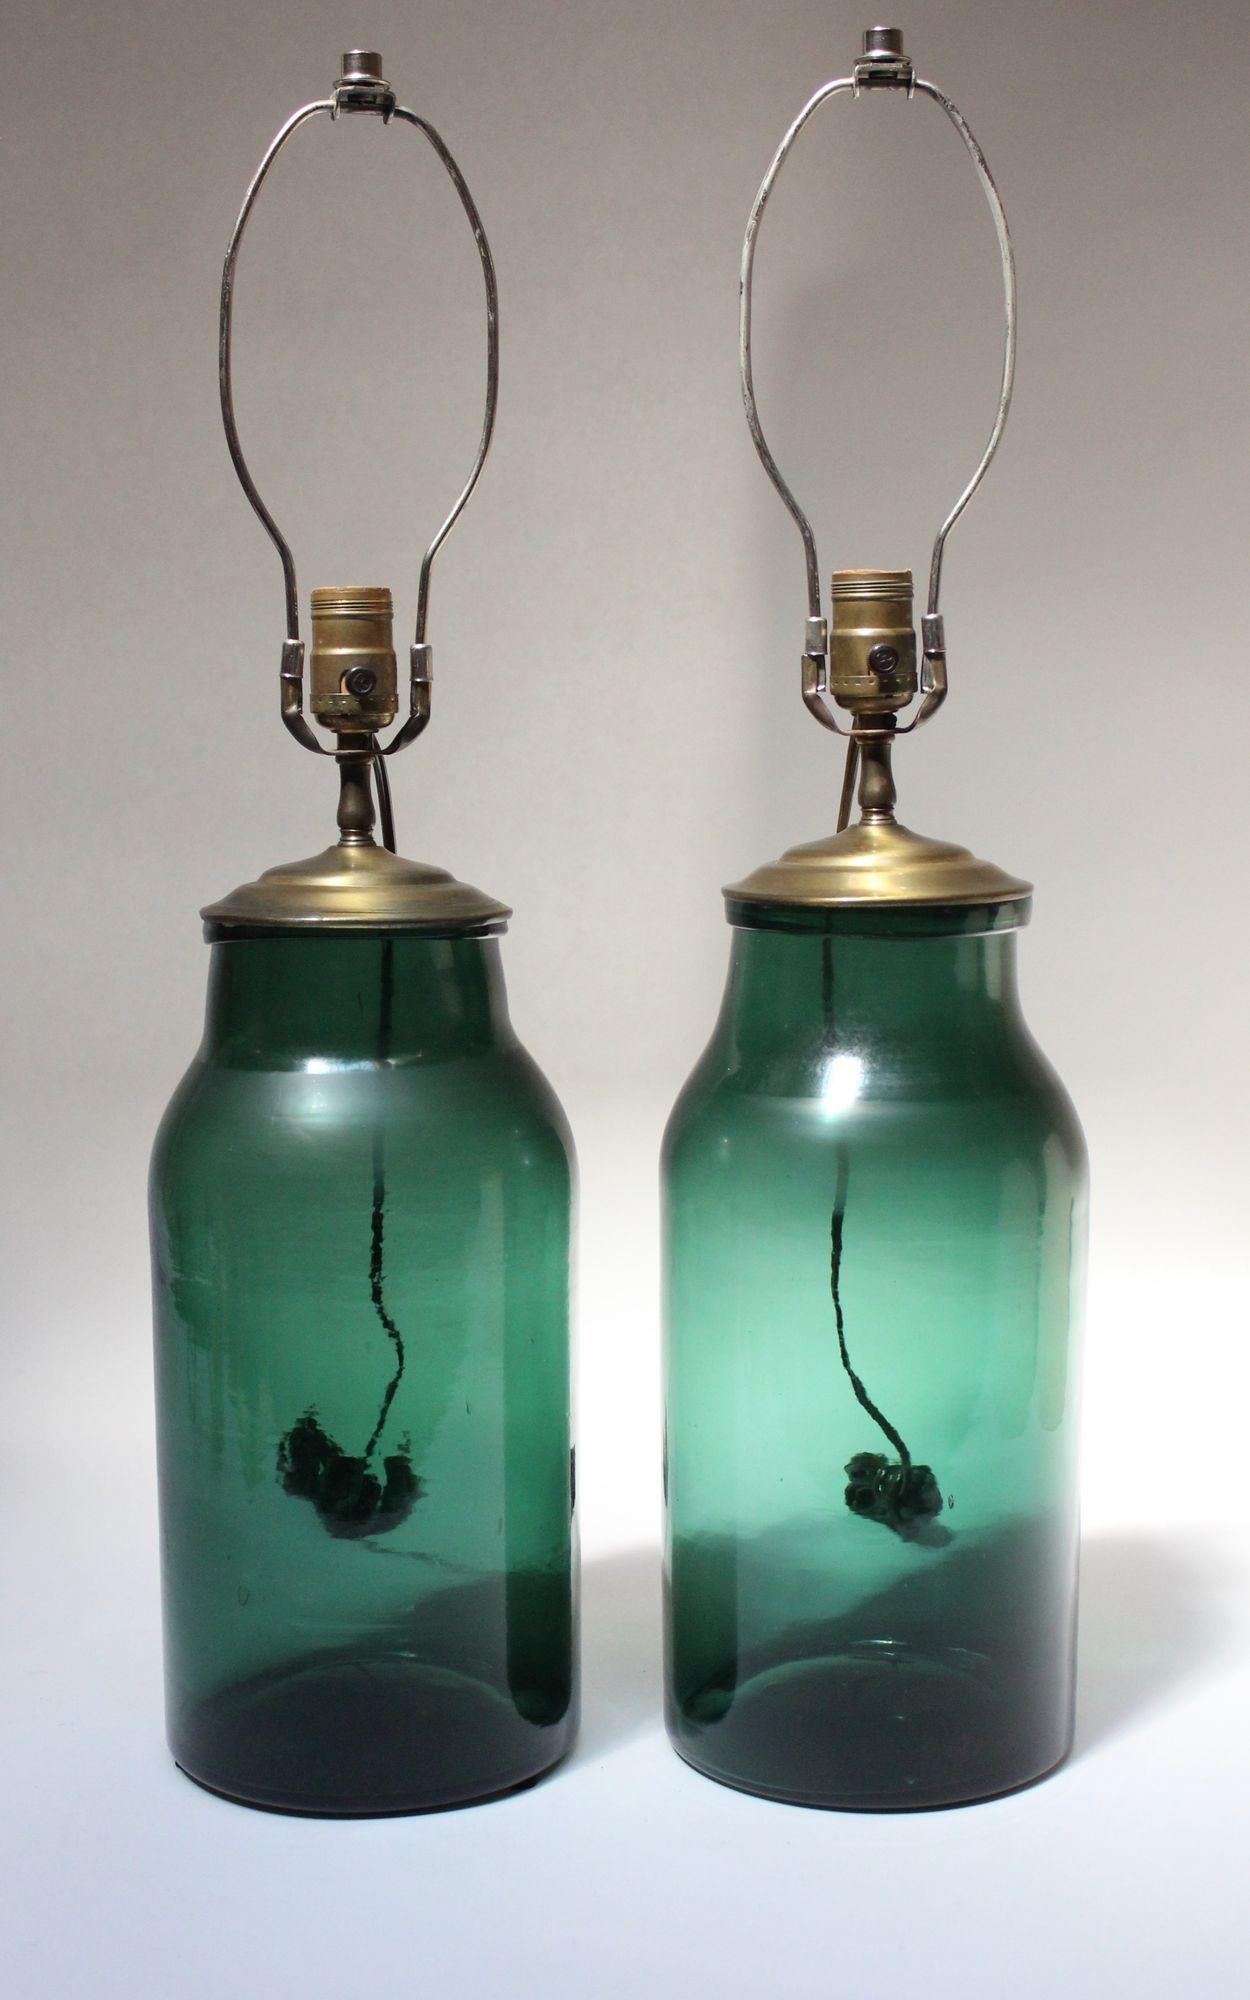 Assembled table lamps made of 19th Century blown-glass vessels in green hue with blue undertones which have been converted to lamps with the addition of brass caps/sockets (made ca. 1930s, USA).
Lamps exhibit trapped air bubbles within the glass